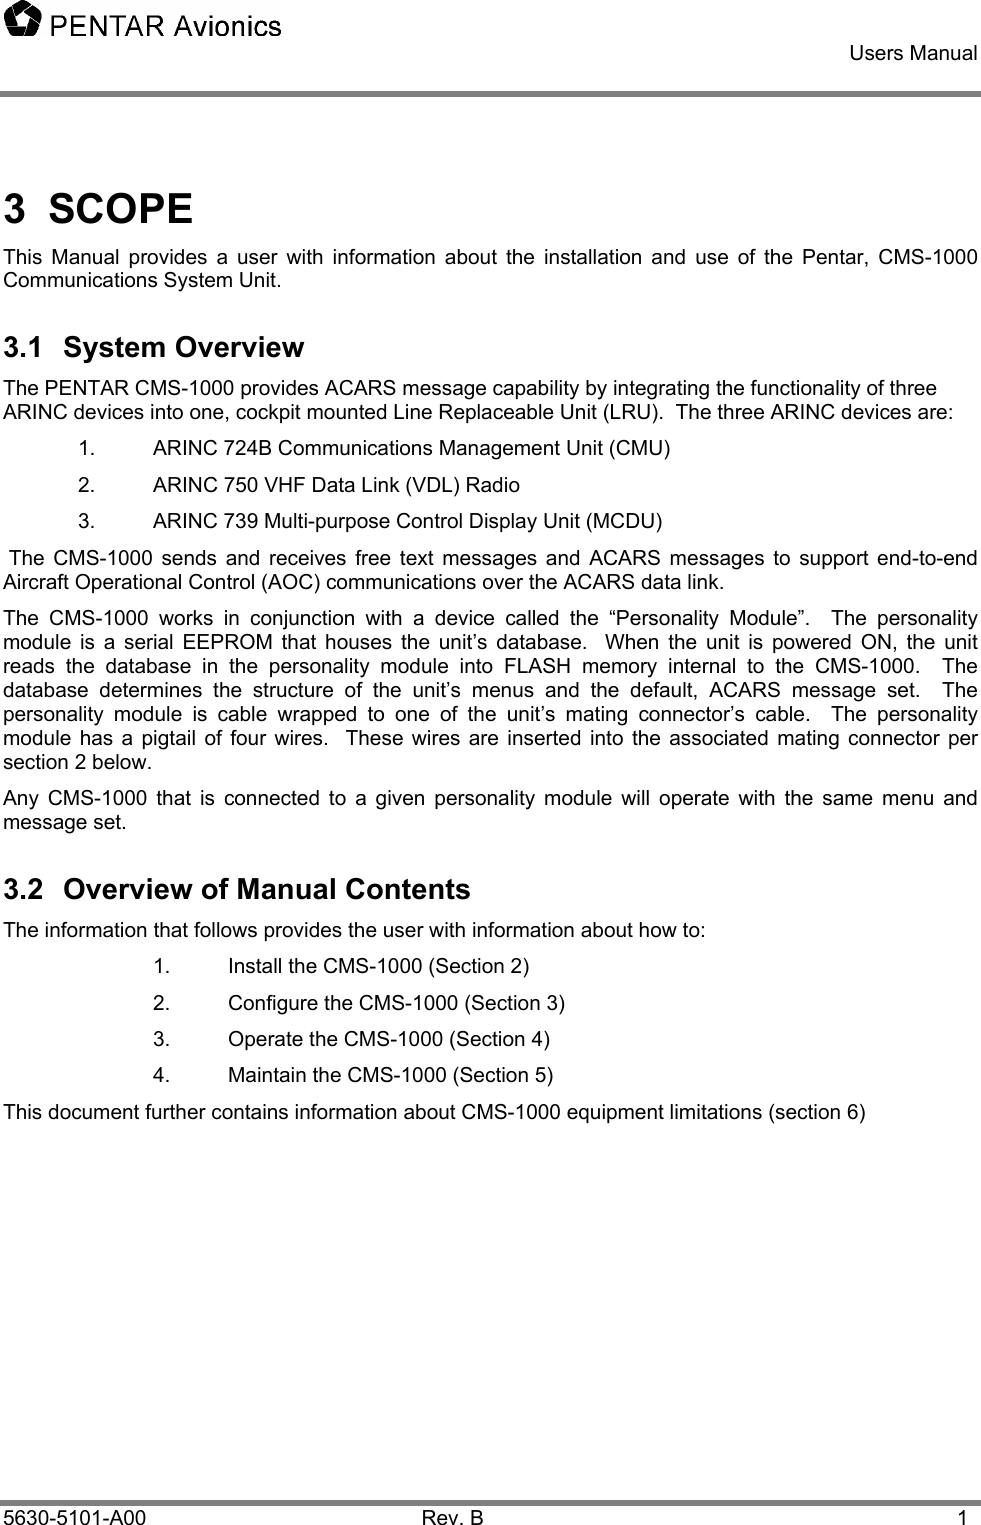    Users Manual    5630-5101-A00 Rev. B  1 3 SCOPE This Manual provides a user with information about the installation and use of the Pentar, CMS-1000 Communications System Unit. 3.1 System Overview The PENTAR CMS-1000 provides ACARS message capability by integrating the functionality of three ARINC devices into one, cockpit mounted Line Replaceable Unit (LRU).  The three ARINC devices are: 1.  ARINC 724B Communications Management Unit (CMU) 2.  ARINC 750 VHF Data Link (VDL) Radio 3.  ARINC 739 Multi-purpose Control Display Unit (MCDU)  The CMS-1000 sends and receives free text messages and ACARS messages to support end-to-end Aircraft Operational Control (AOC) communications over the ACARS data link. The CMS-1000 works in conjunction with a device called the “Personality Module”.  The personality module is a serial EEPROM that houses the unit’s database.  When the unit is powered ON, the unit reads the database in the personality module into FLASH memory internal to the CMS-1000.  The database determines the structure of the unit’s menus and the default, ACARS message set.  The personality module is cable wrapped to one of the unit’s mating connector’s cable.  The personality module has a pigtail of four wires.  These wires are inserted into the associated mating connector per section 2 below. Any CMS-1000 that is connected to a given personality module will operate with the same menu and message set.    3.2  Overview of Manual Contents The information that follows provides the user with information about how to: 1.  Install the CMS-1000 (Section 2) 2.  Configure the CMS-1000 (Section 3) 3.  Operate the CMS-1000 (Section 4) 4.  Maintain the CMS-1000 (Section 5) This document further contains information about CMS-1000 equipment limitations (section 6) 